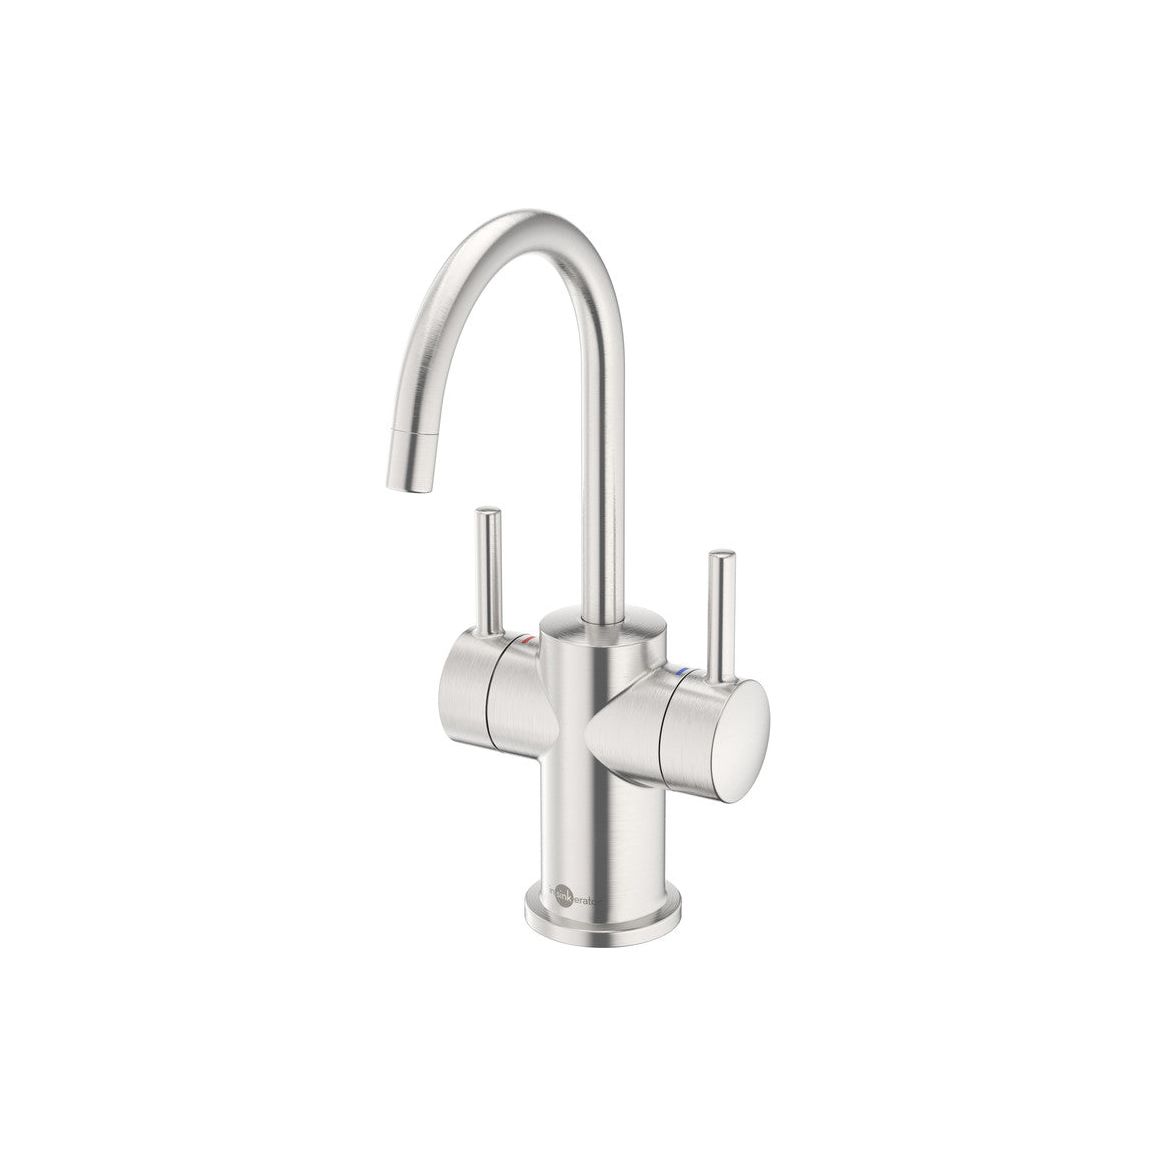 InSinkErator FHC3010 Hot/Cold Water Mixer Tap & Neo Tank - Brushed Steel